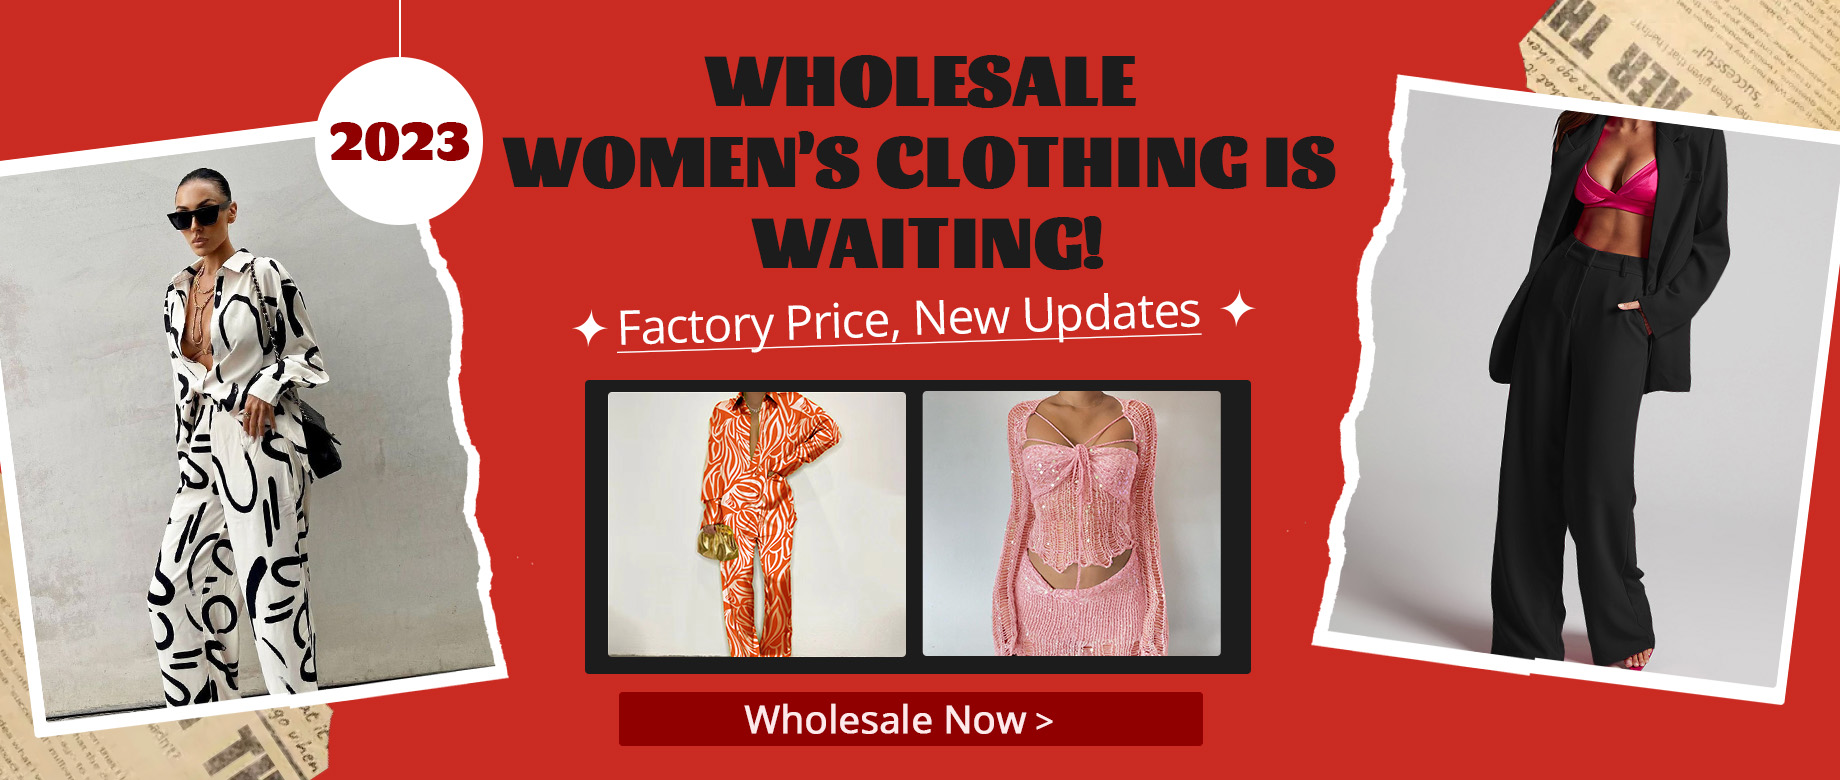 THE MOST PROFITABLE PROJECT OF THE FALL SEASON- WHOLESALE WOMEN'S CLOTHING IS WAITING!